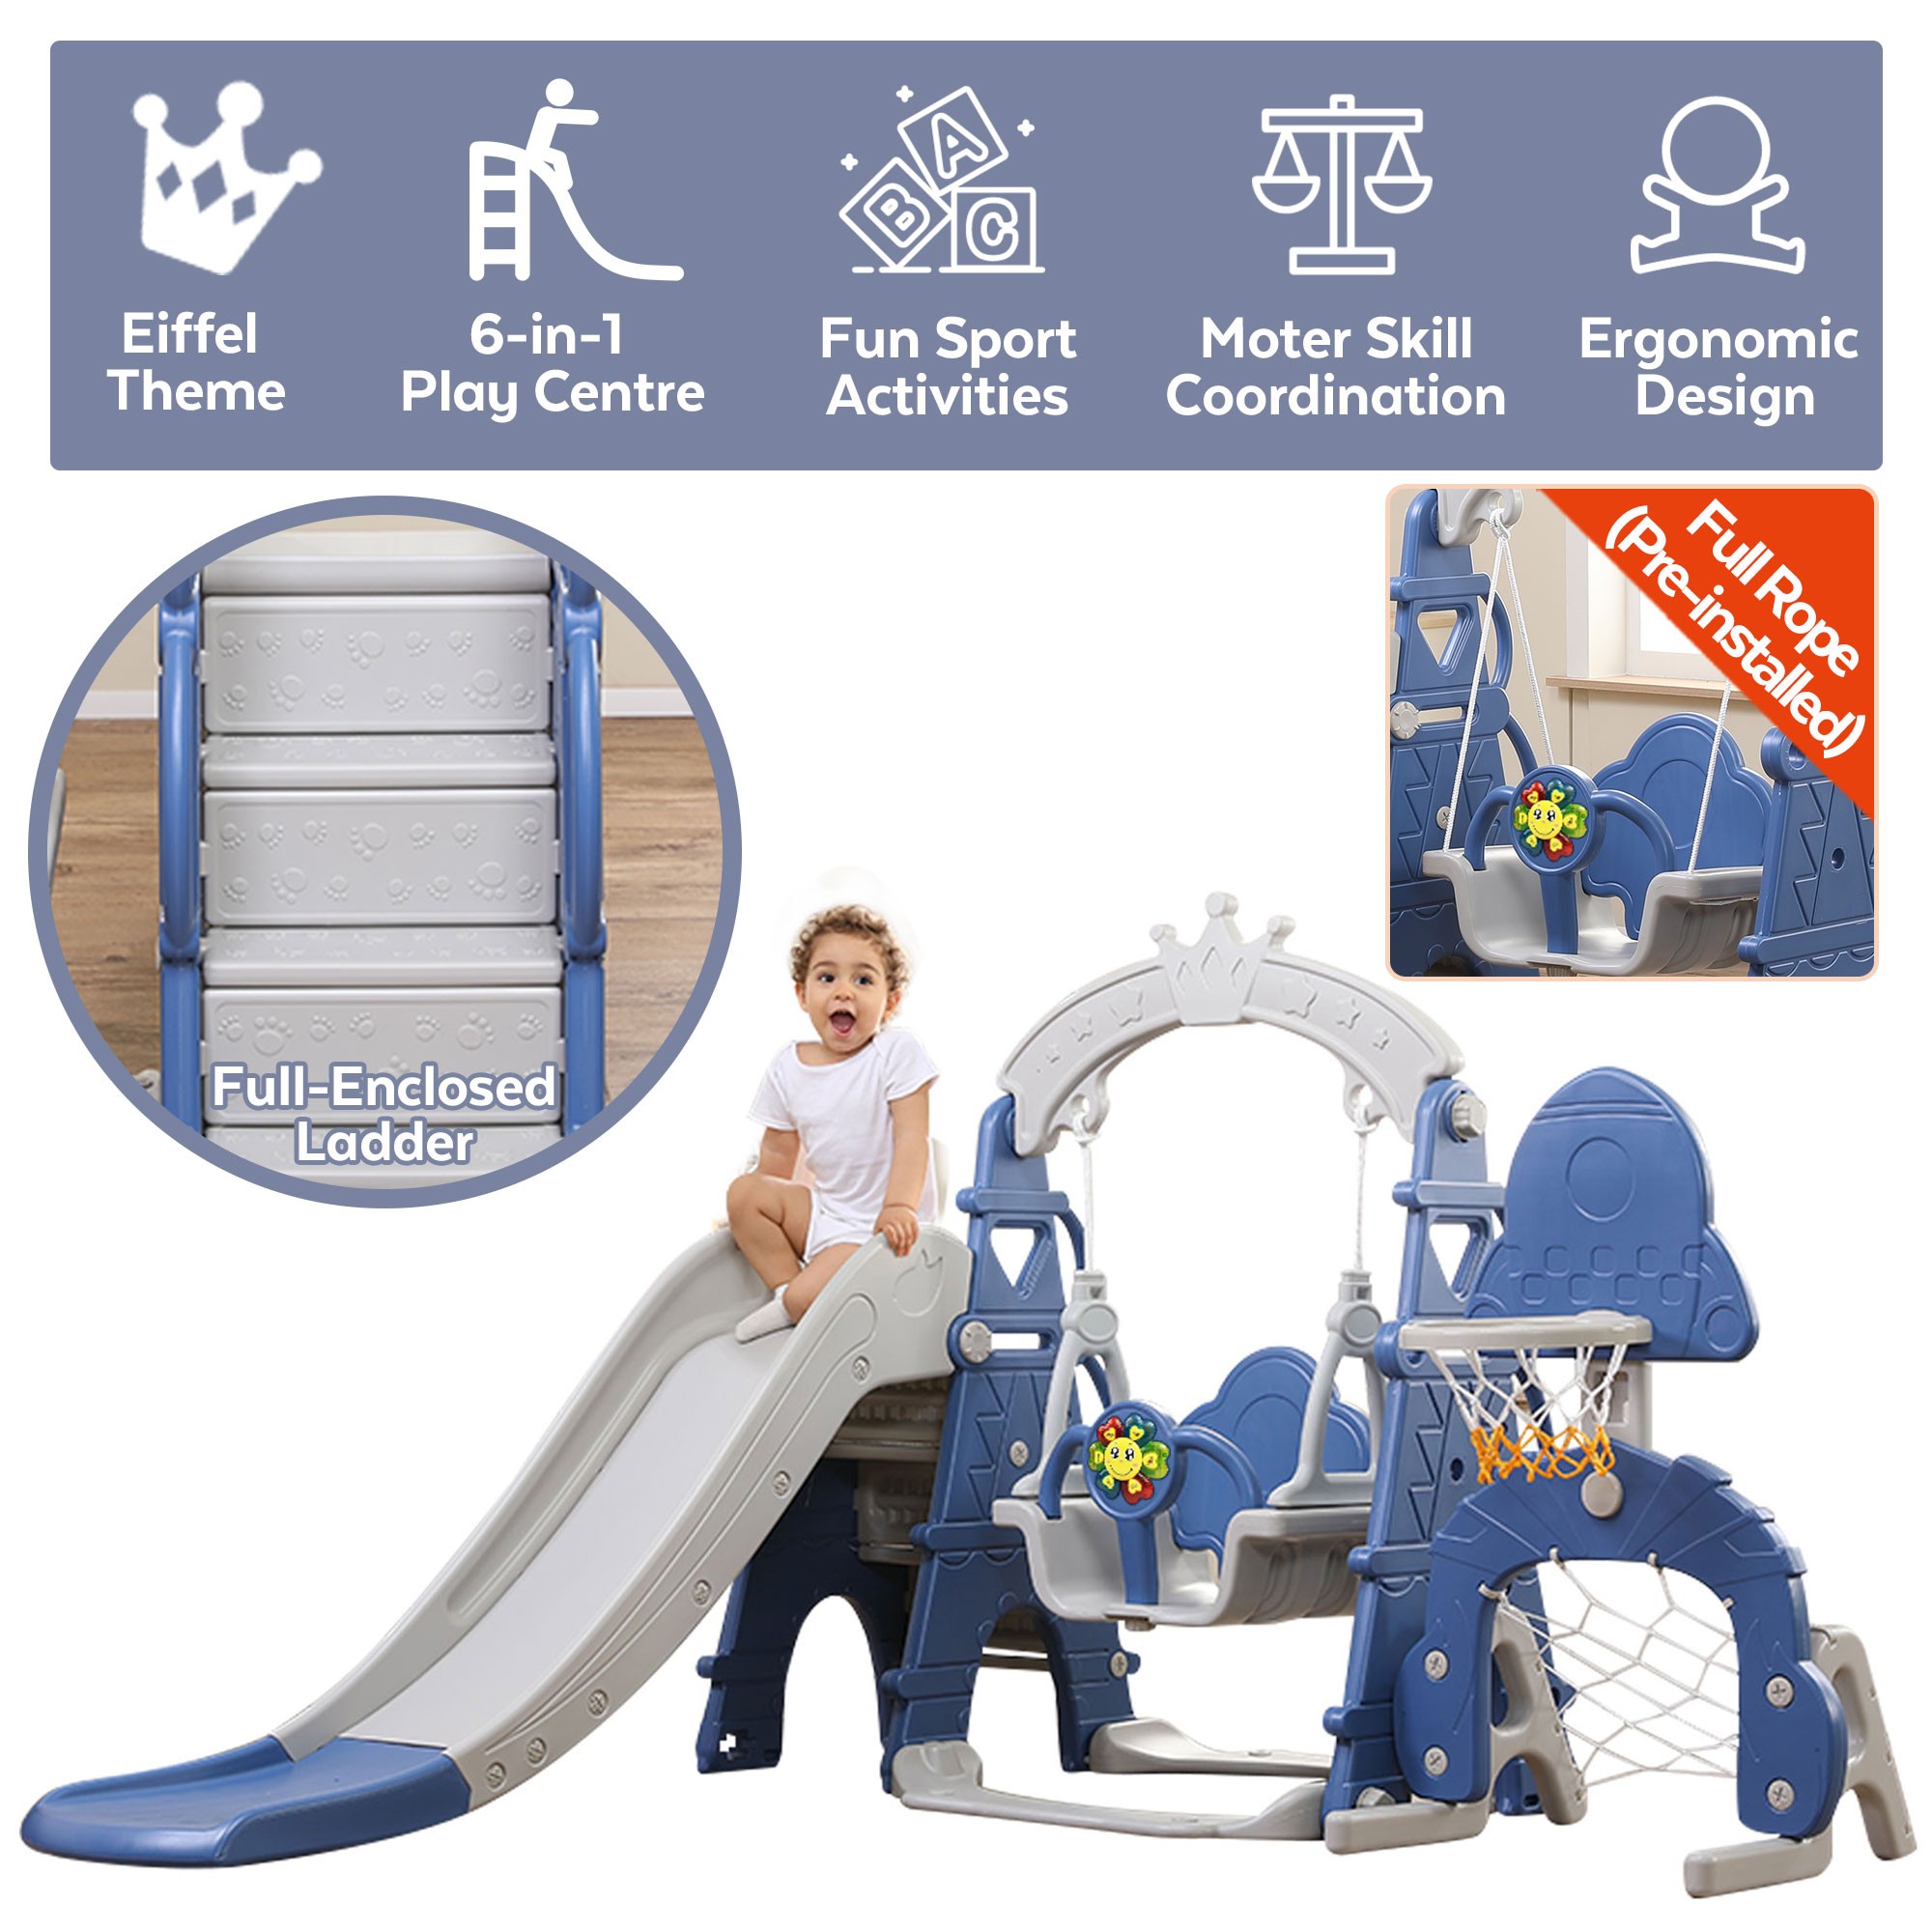 Children Swing and Slide Set w/ Basketball Hoop & Music Player Kids Fun Climber Slider Set for Indoor and Outdoors Playground Play Set Extra Long Slide Castle, Blue 